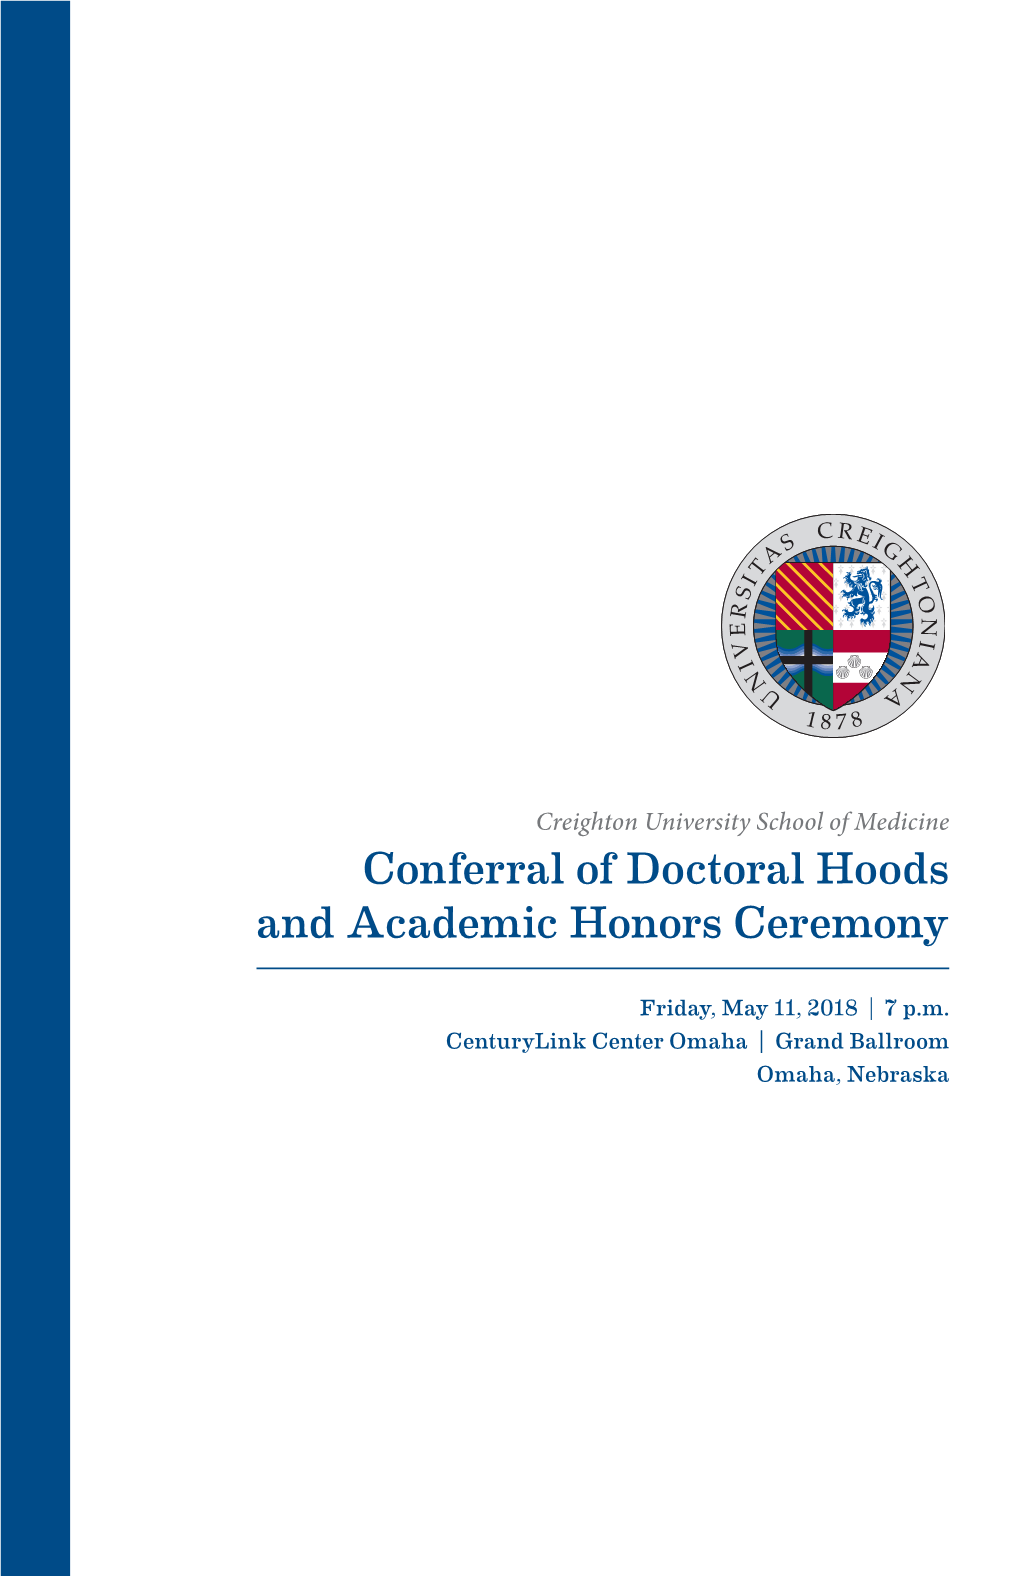 Conferral of Doctoral Hoods and Academic Honors Ceremony